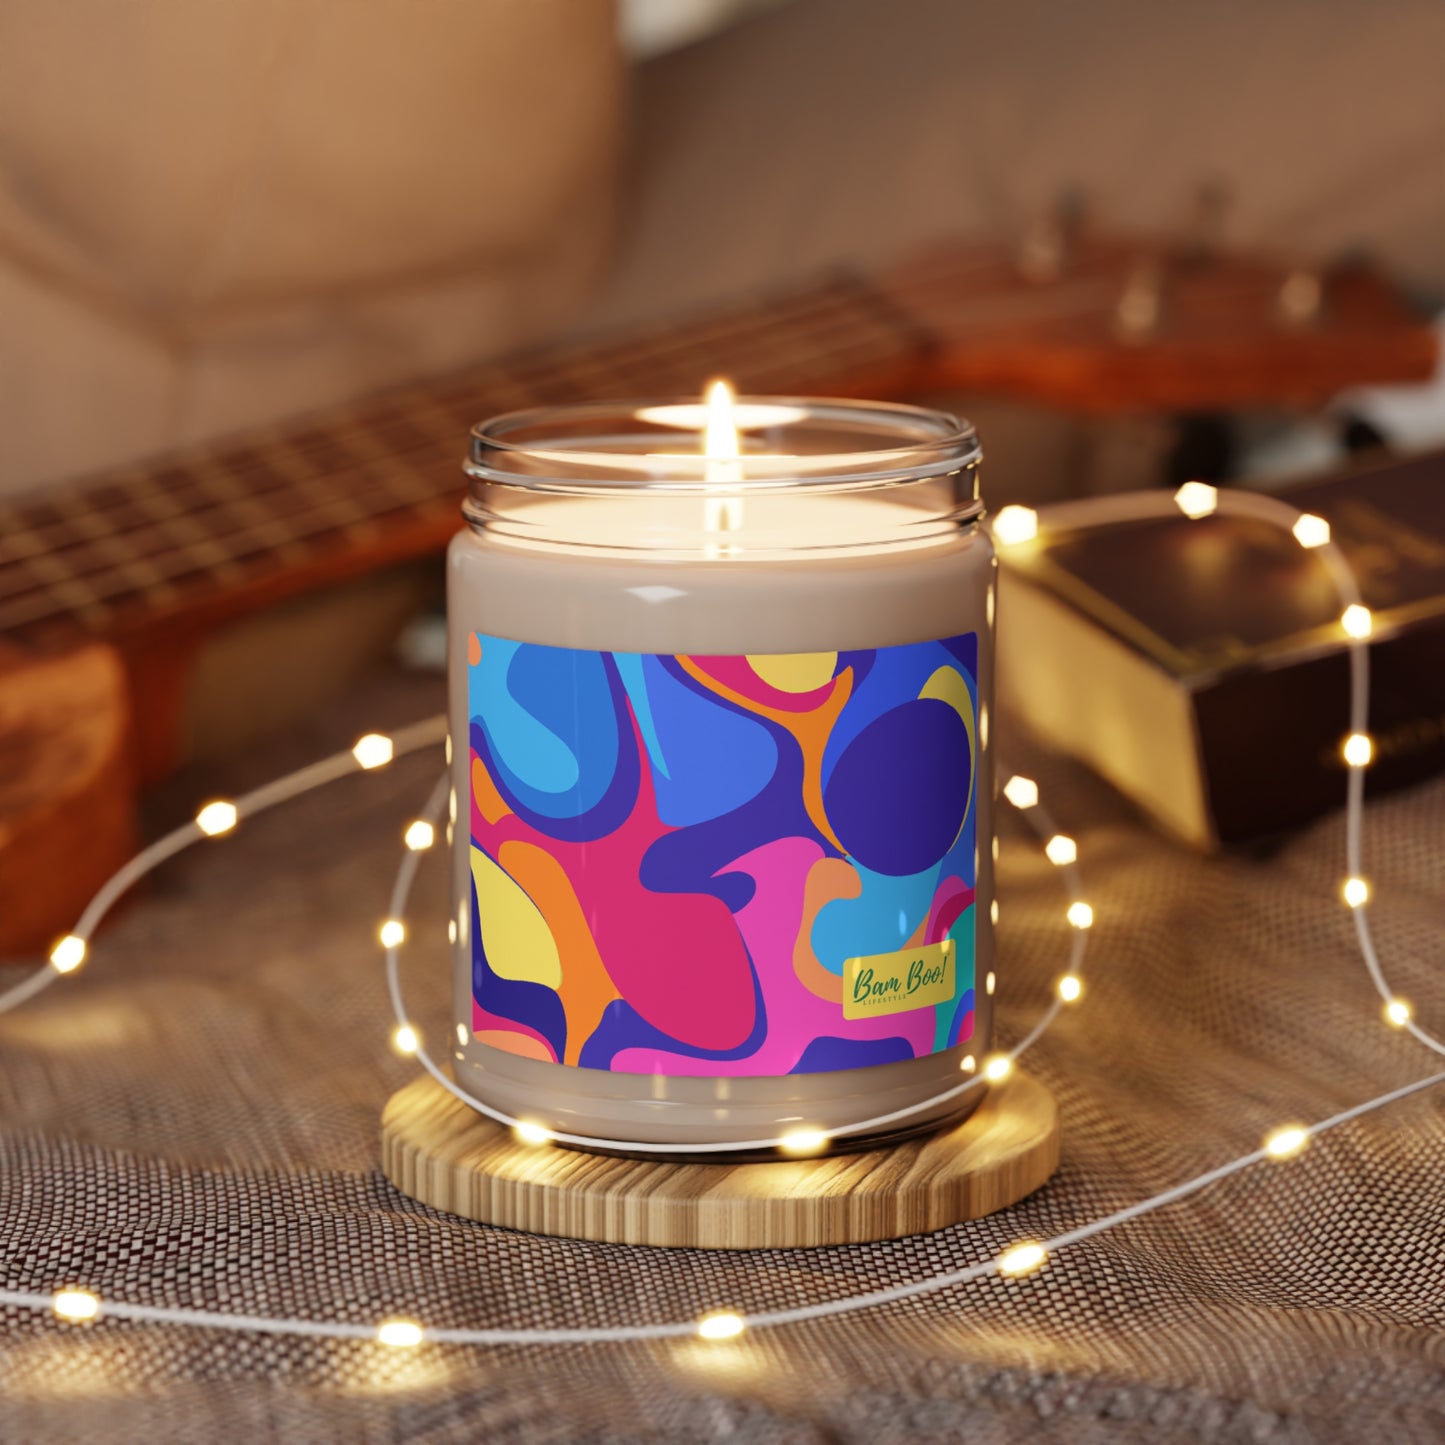 "Fostering Joy: A Radiant Artistic Expression" - Bam Boo! Lifestyle Eco-friendly Soy Candle